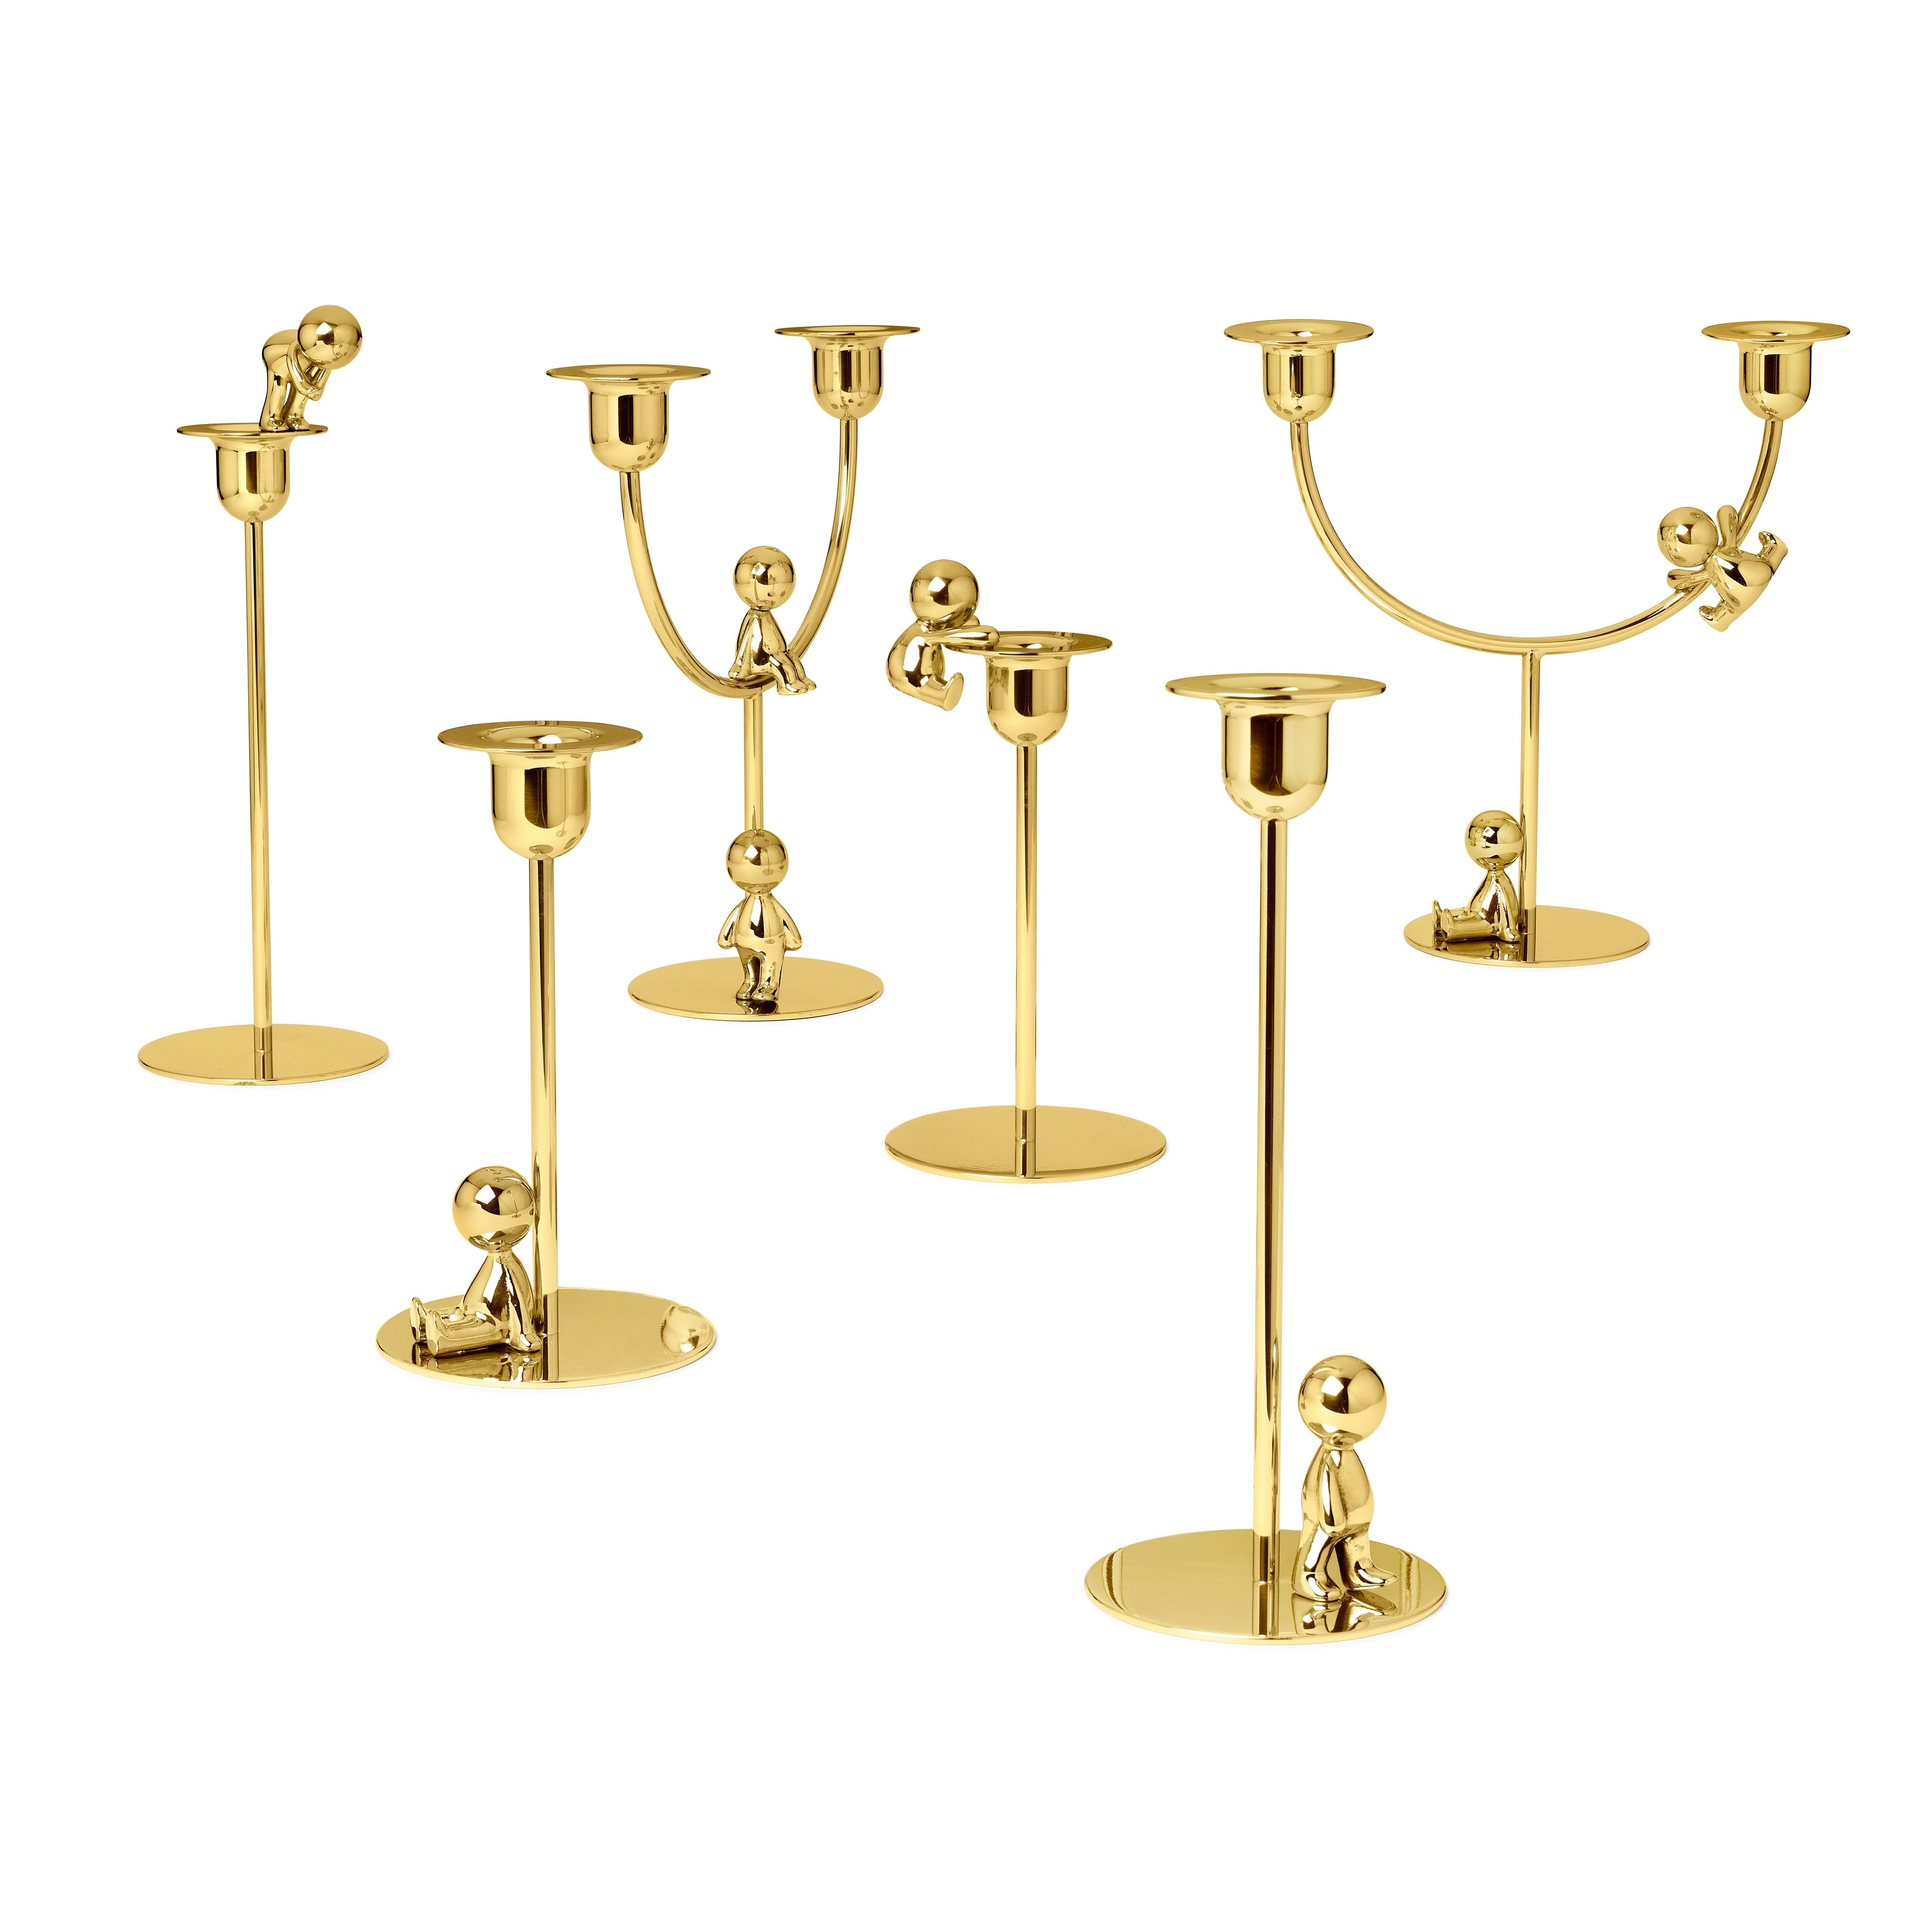 This delightful polished brass short candlestick is a creative accent for any modern interior. Ideal for displaying tall dinner candles, the Minimalist design is marked by a bulbed bobeche with a wide rim supported by a short column and a flat base.